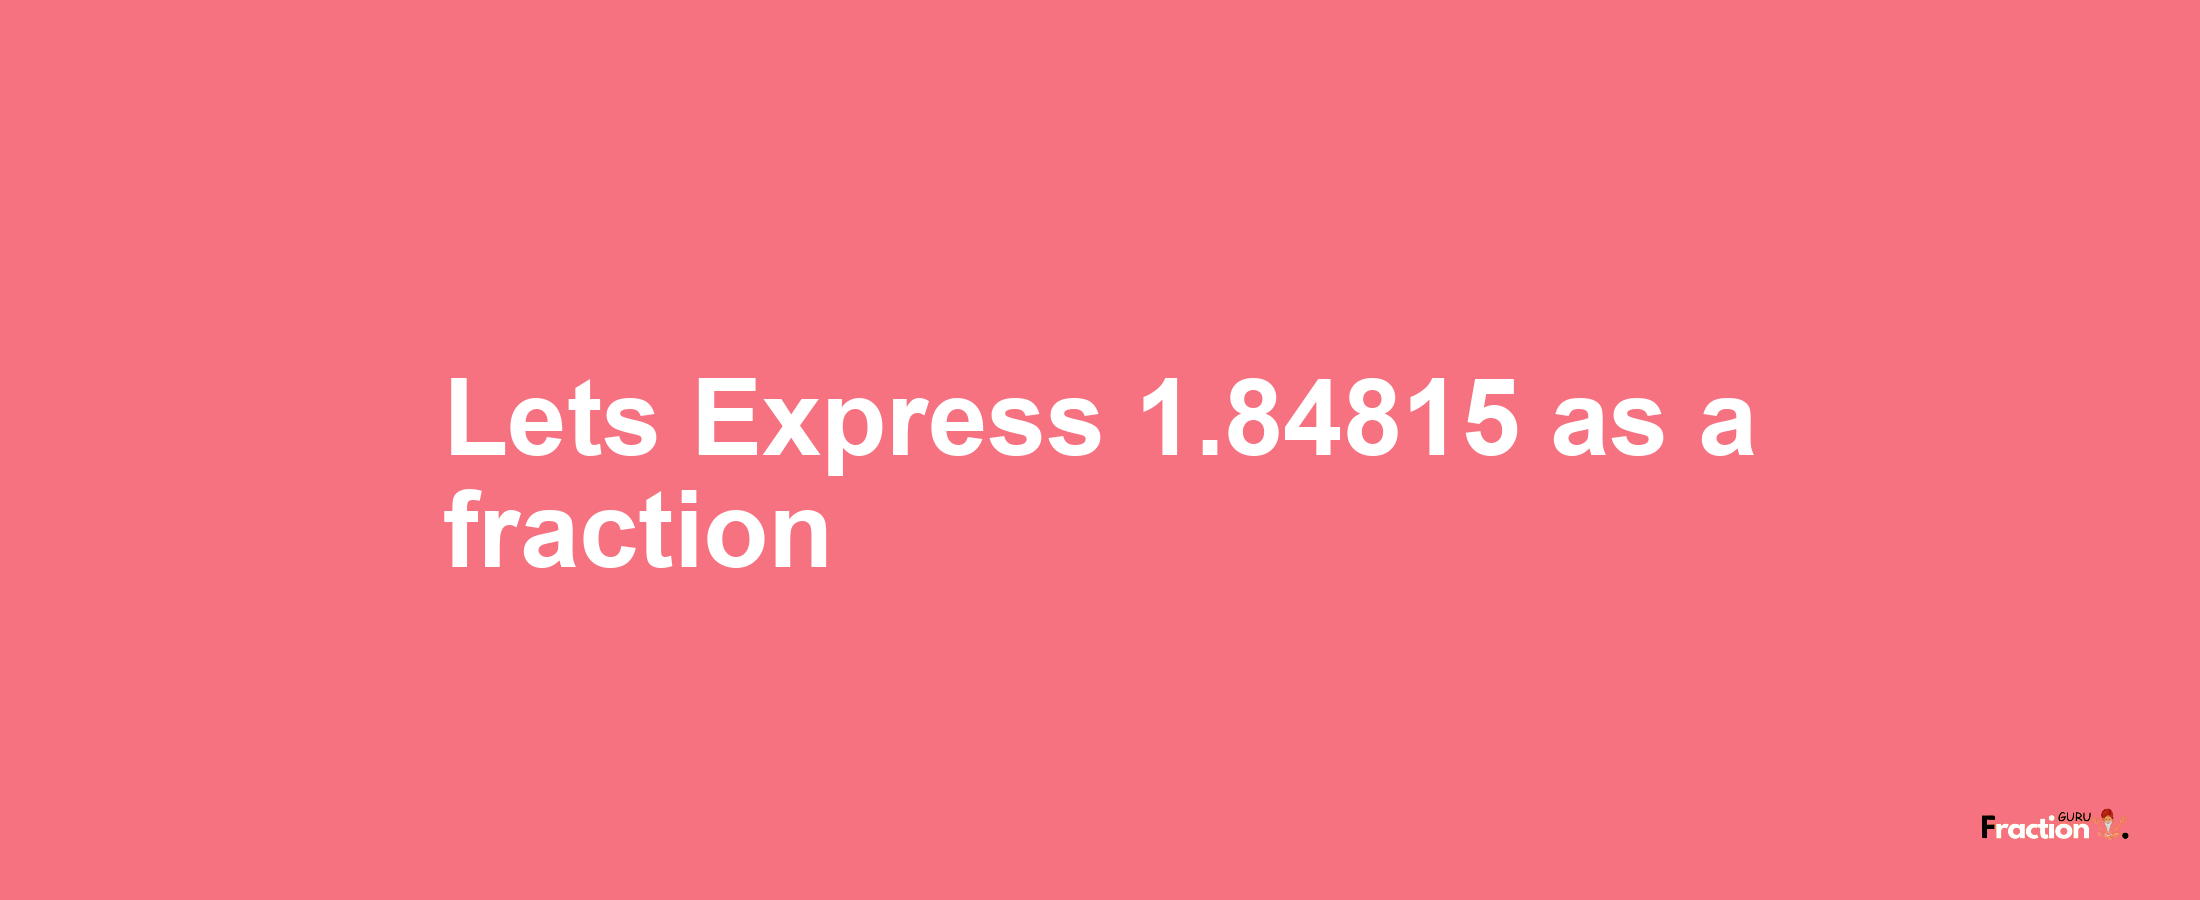 Lets Express 1.84815 as afraction